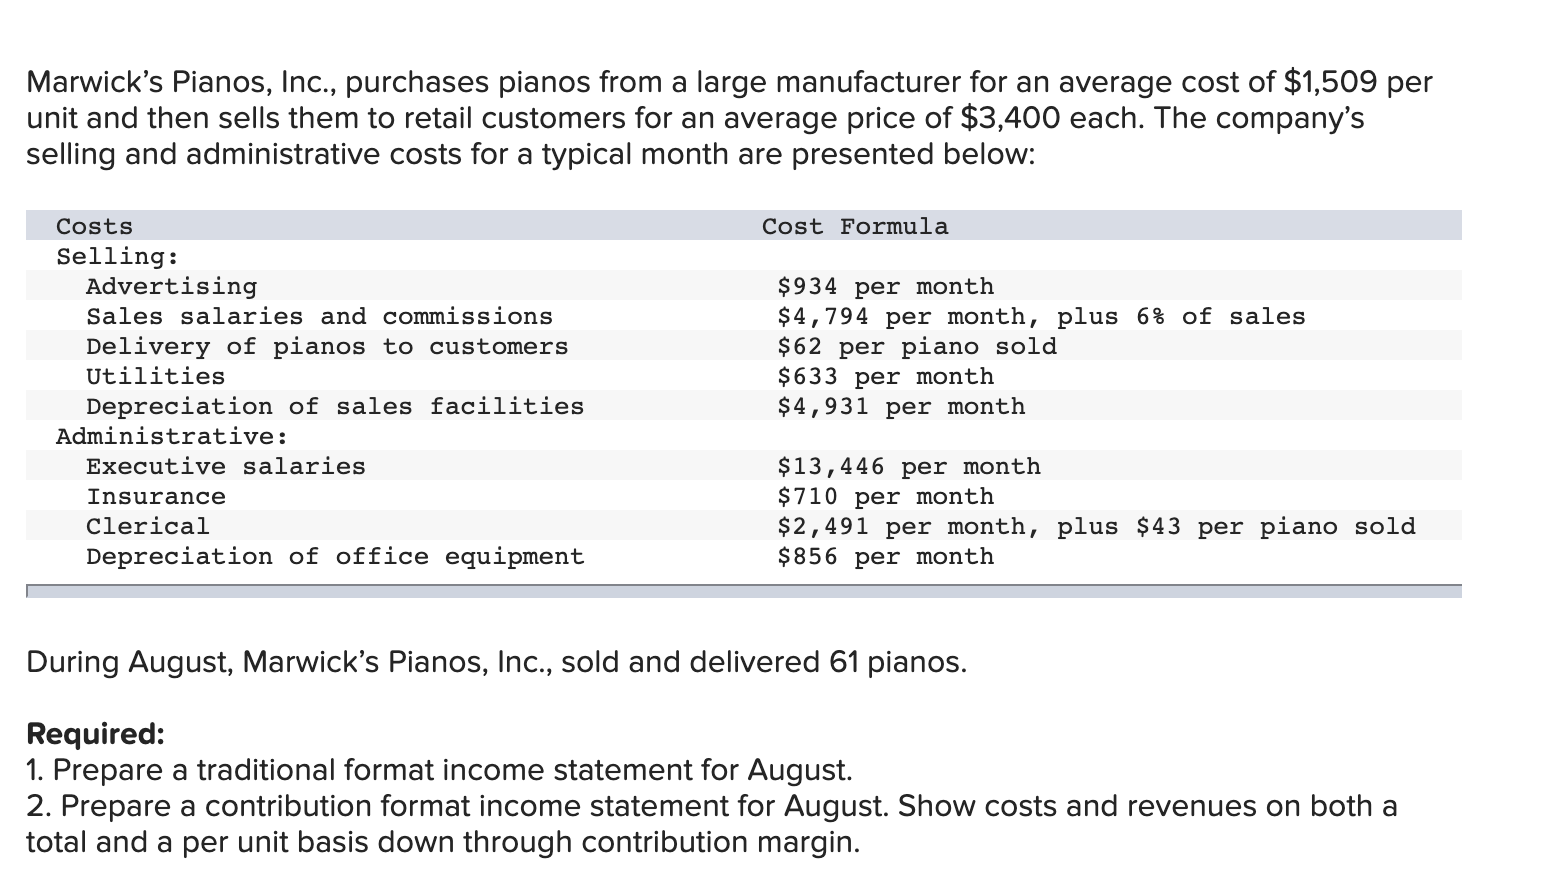 Marwicks Pianos, Inc., purchases pianos from a large manufacturer for an average cost of $1,509 perunit and then sells them